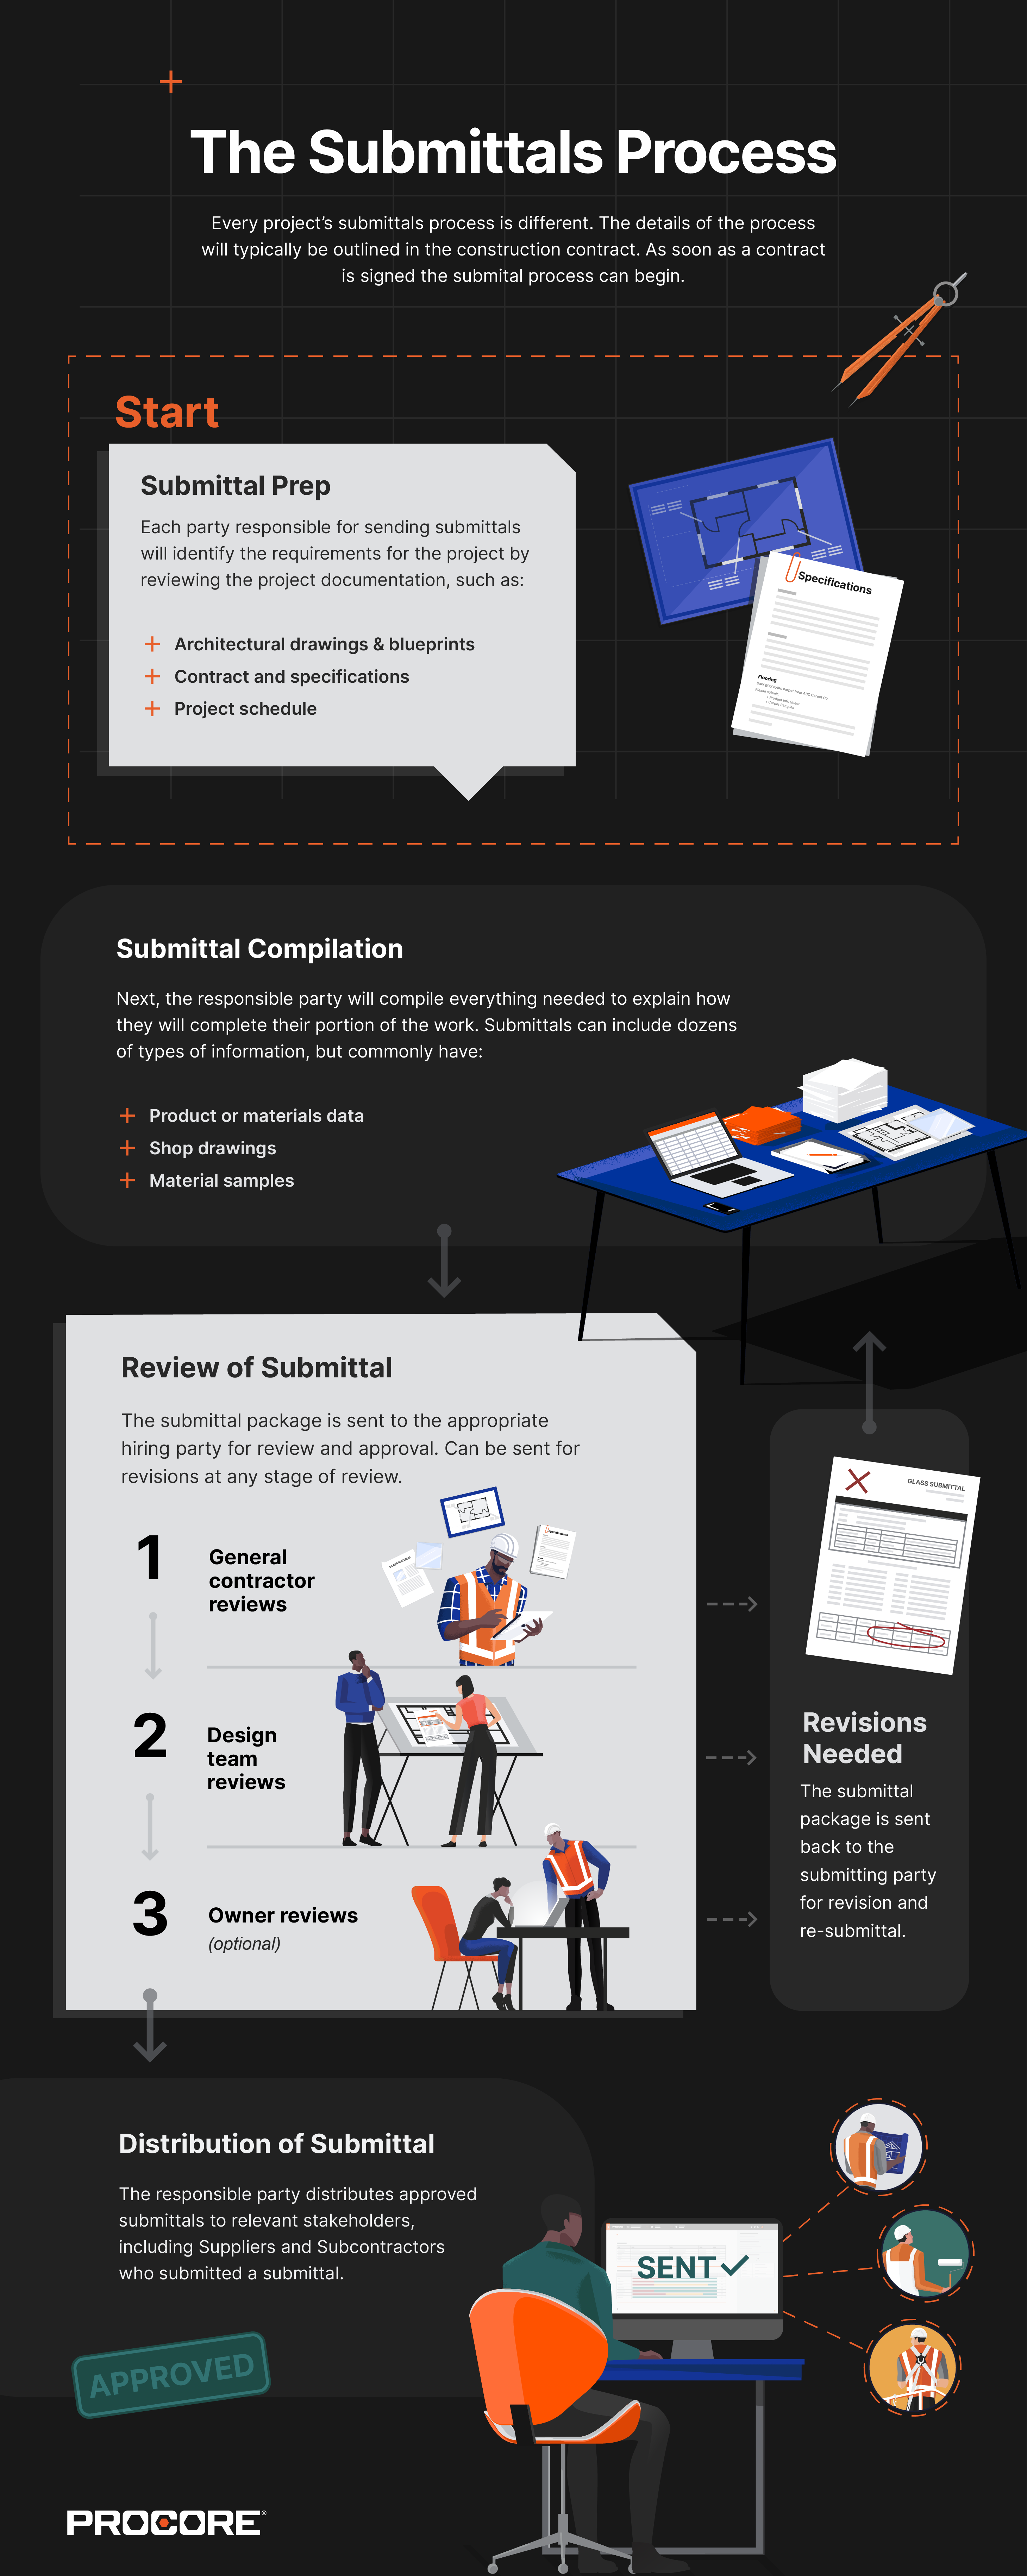 An infographic illustrating the submittal approval process